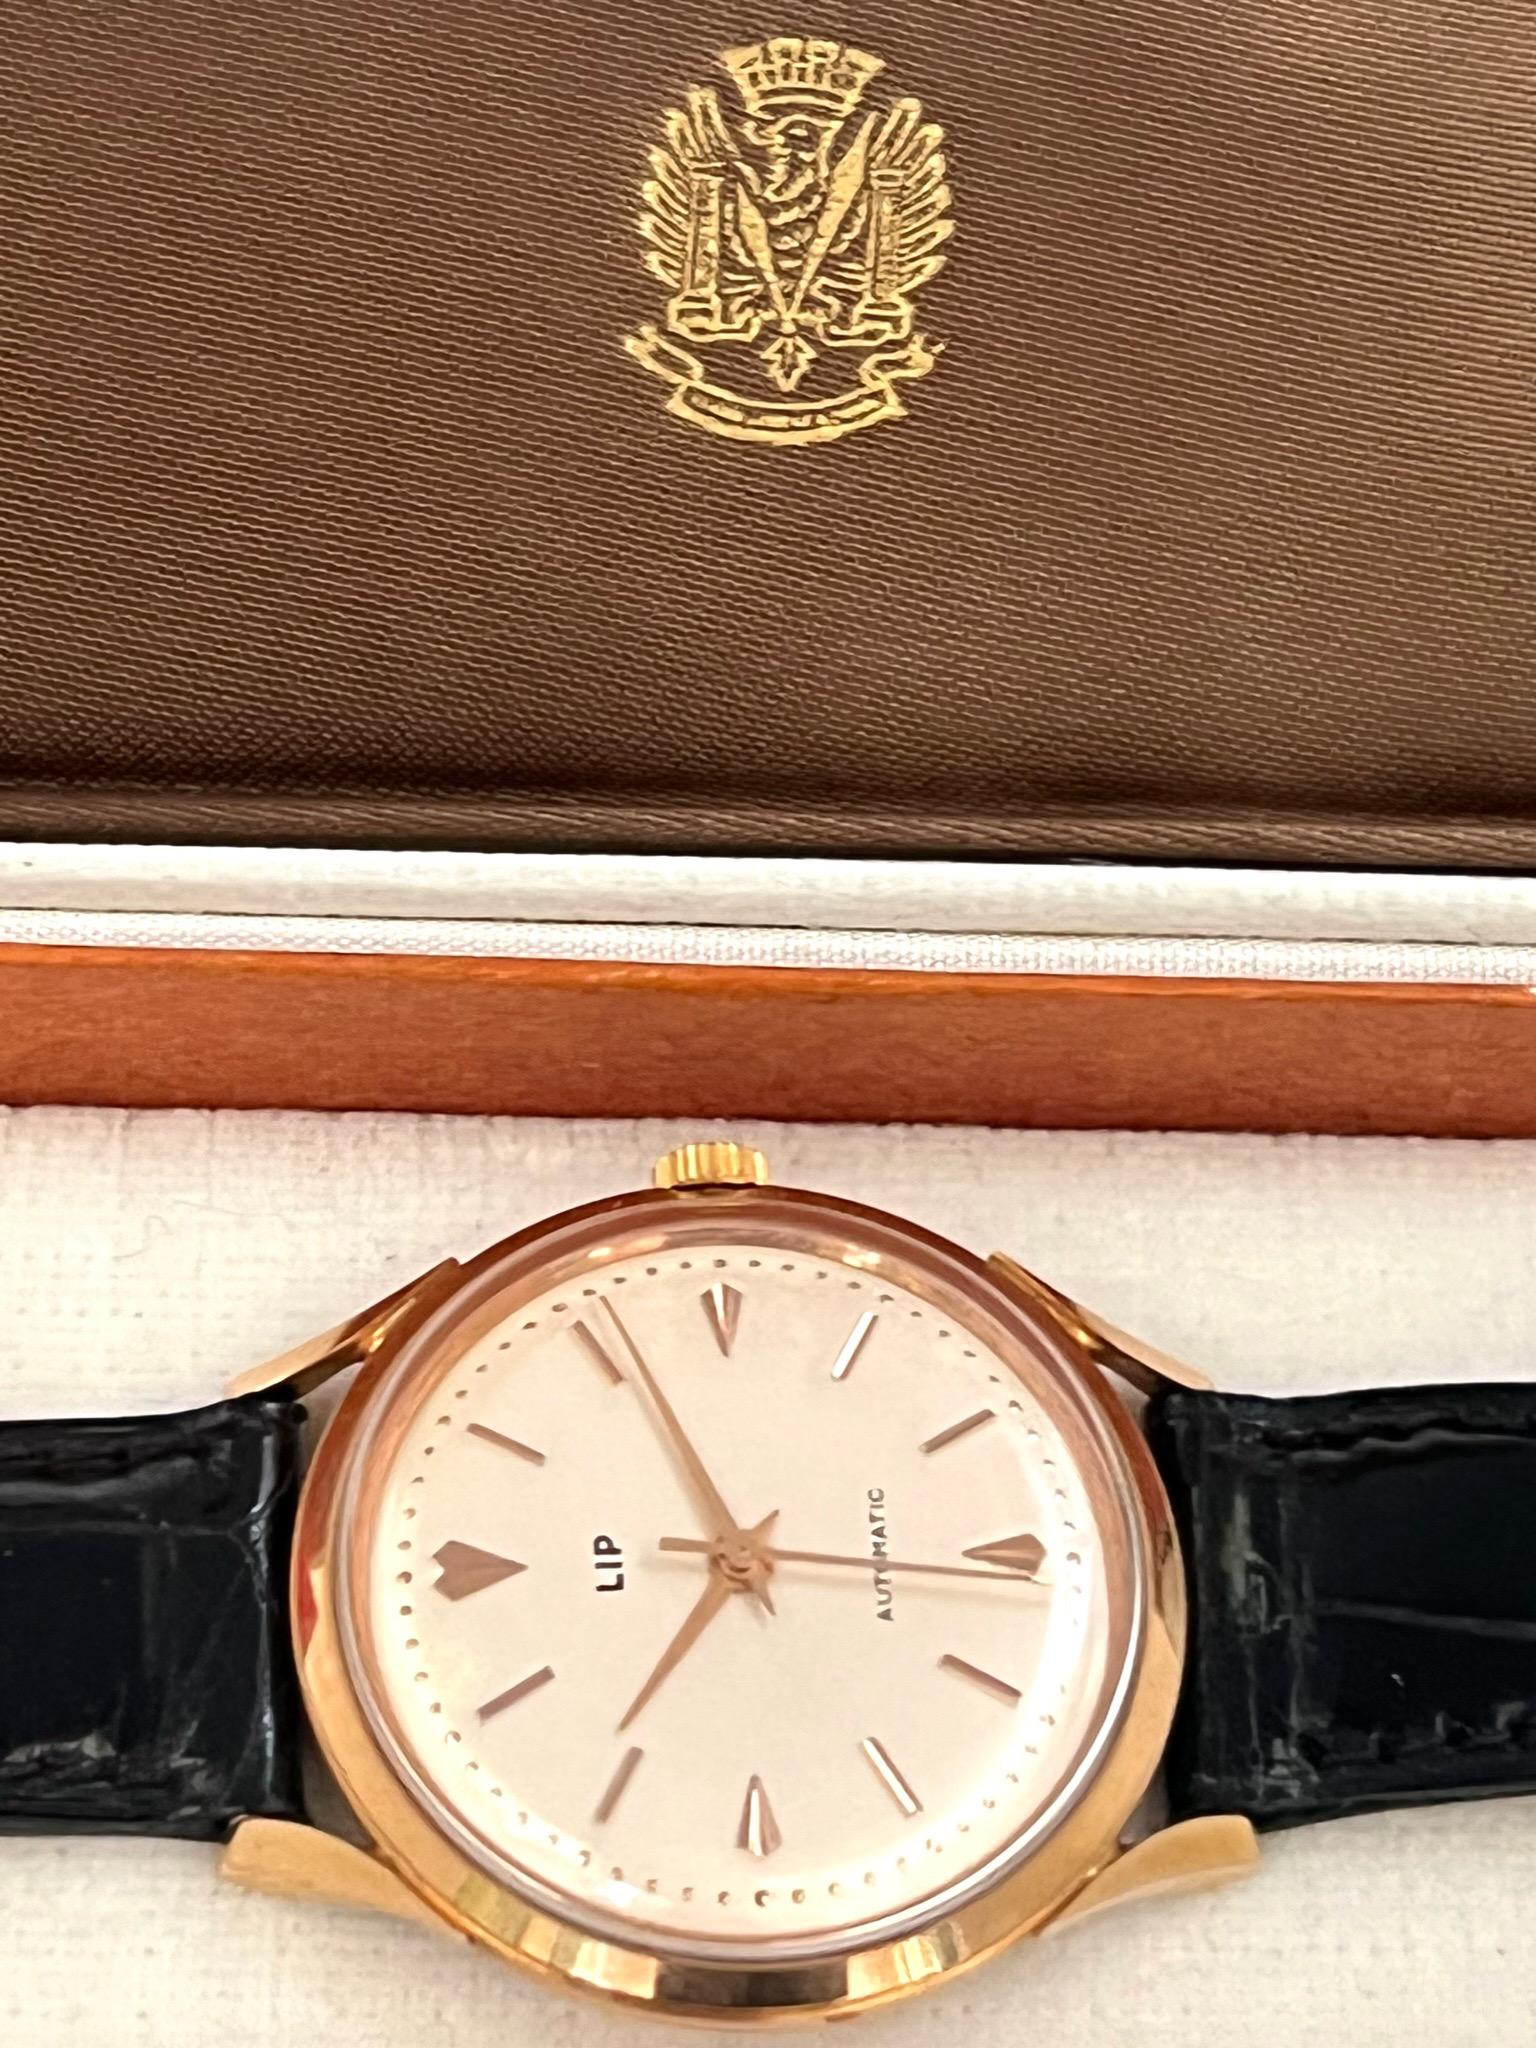 The Lip 18 Carat Gold Automatic wristwatch. Beautiful rose gold case with screw down case back. Gold applied markers to the cream dial, gold daphne hands.

Swiss 21 Jewelled automatic movement with Swiss lever escapement. Original crocodile strap